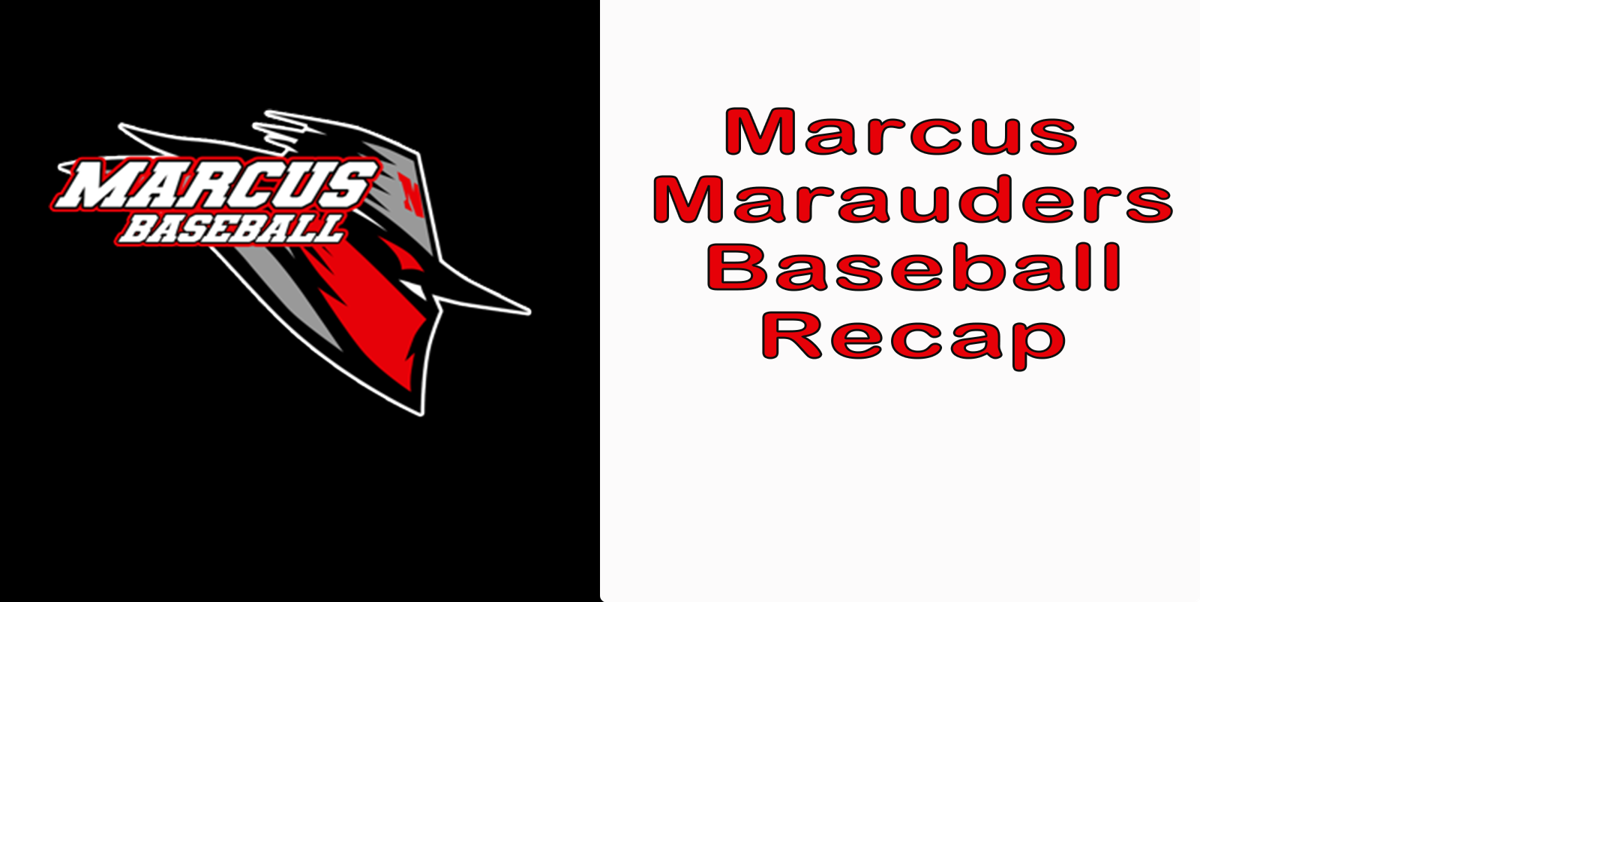 Marauders sweep Farmers, edged out by Eagles in extras